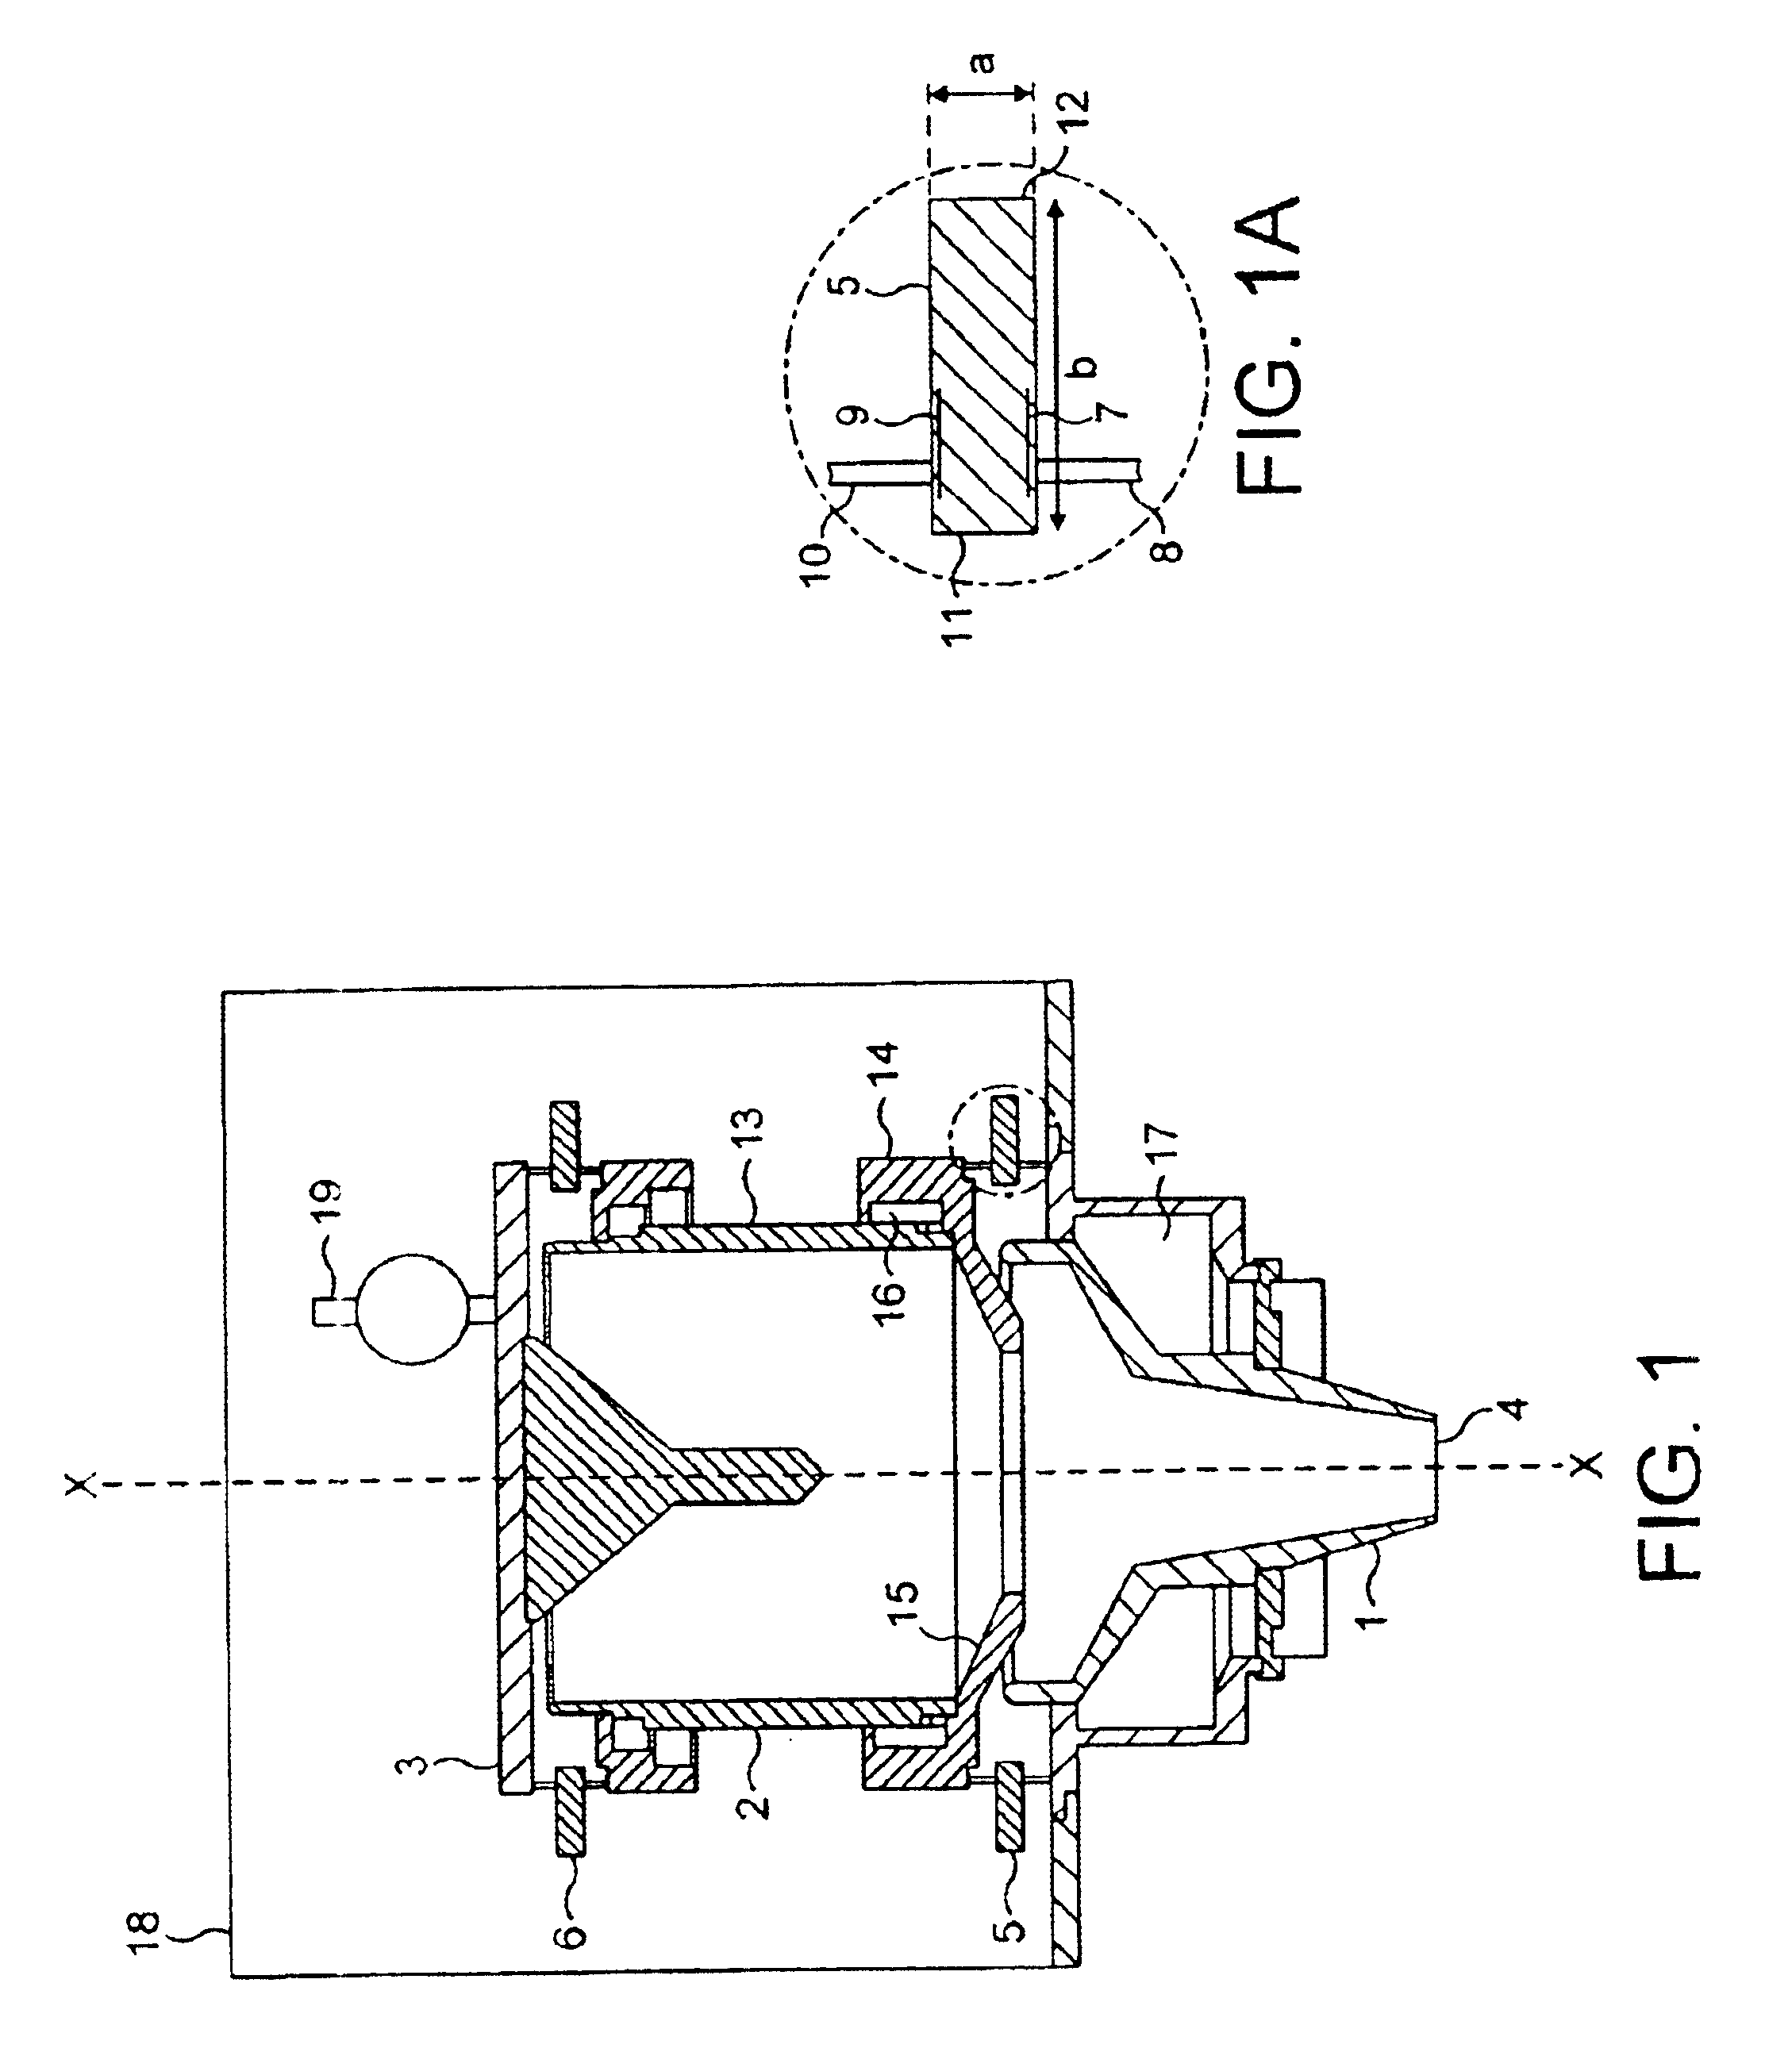 Multi-stage collector having electrode stages isolated by a distributed bypass capacitor